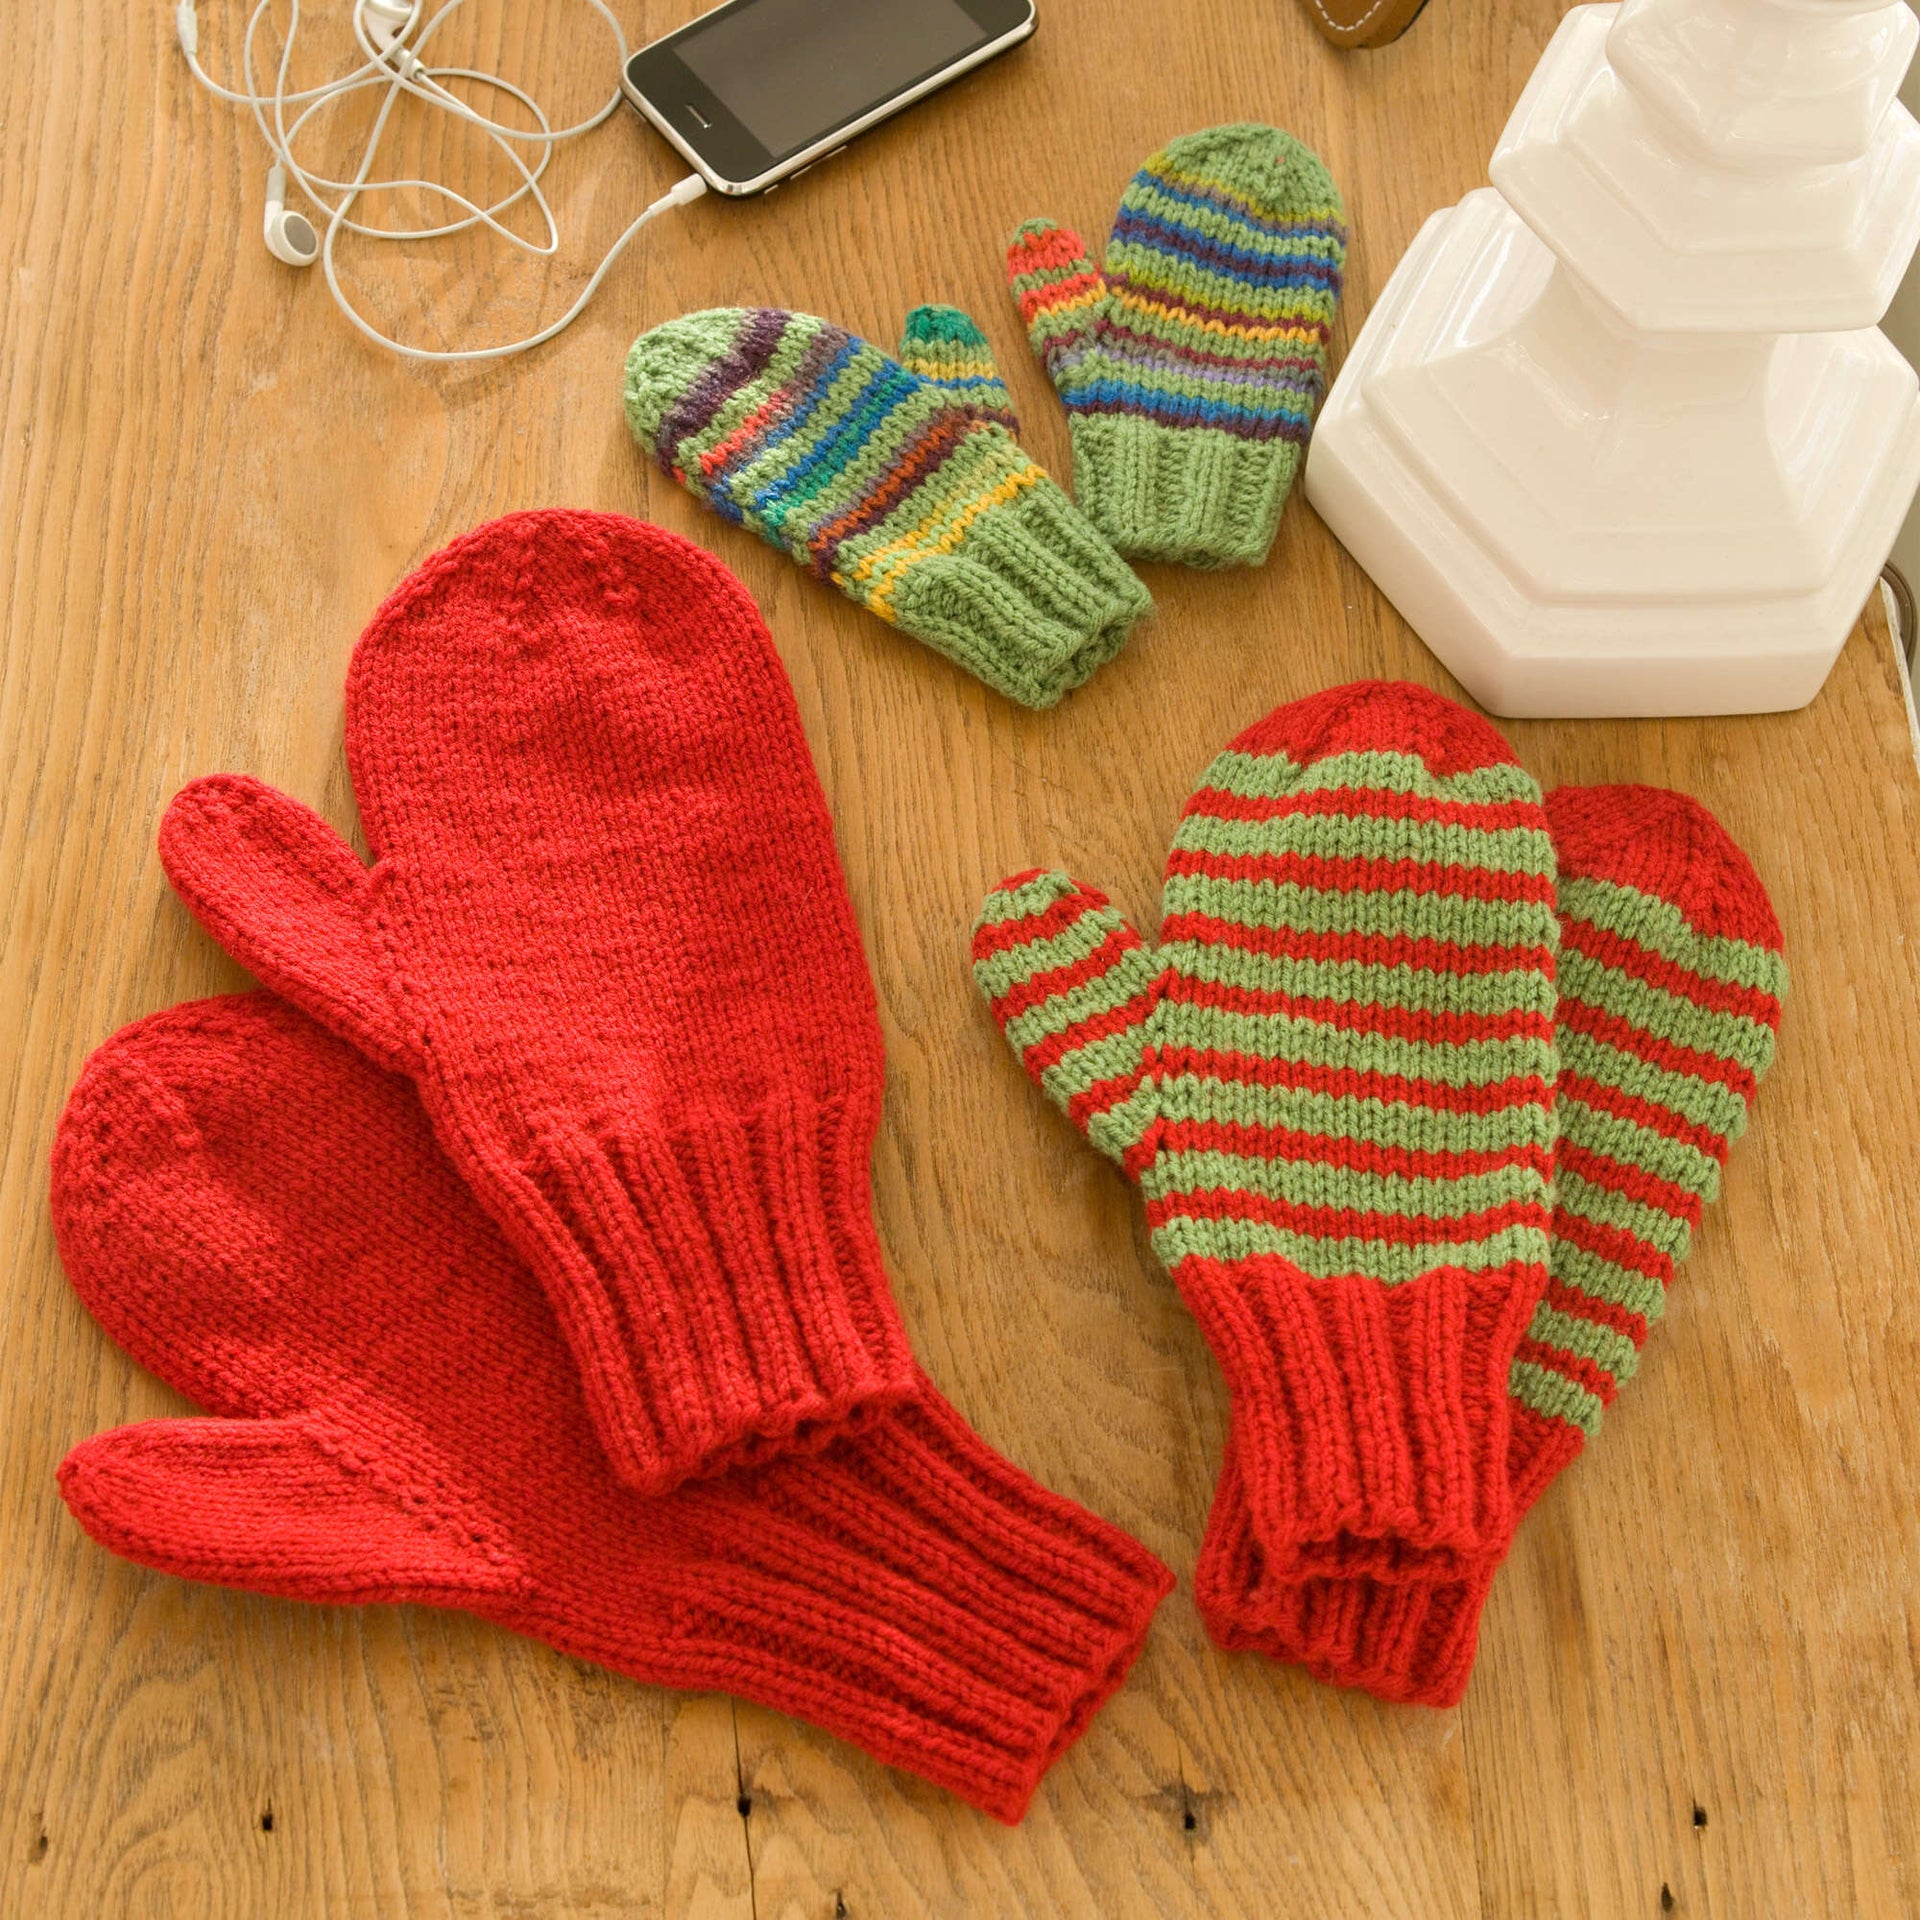 Red Heart Mittens For All Pattern | Yarnspirations